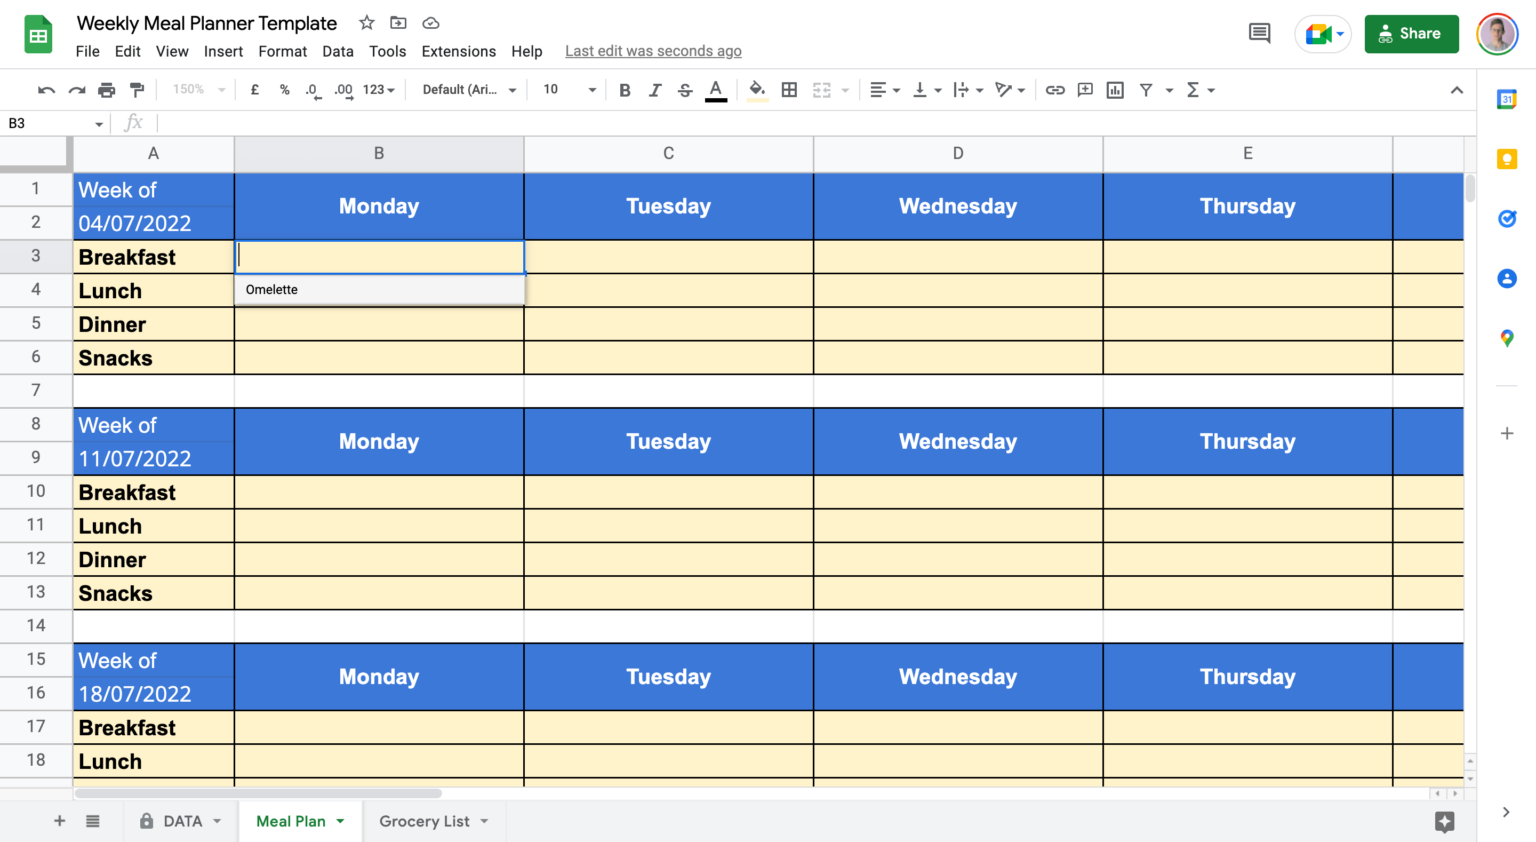 Free Weekly Meal Plan Template [Google Sheets]